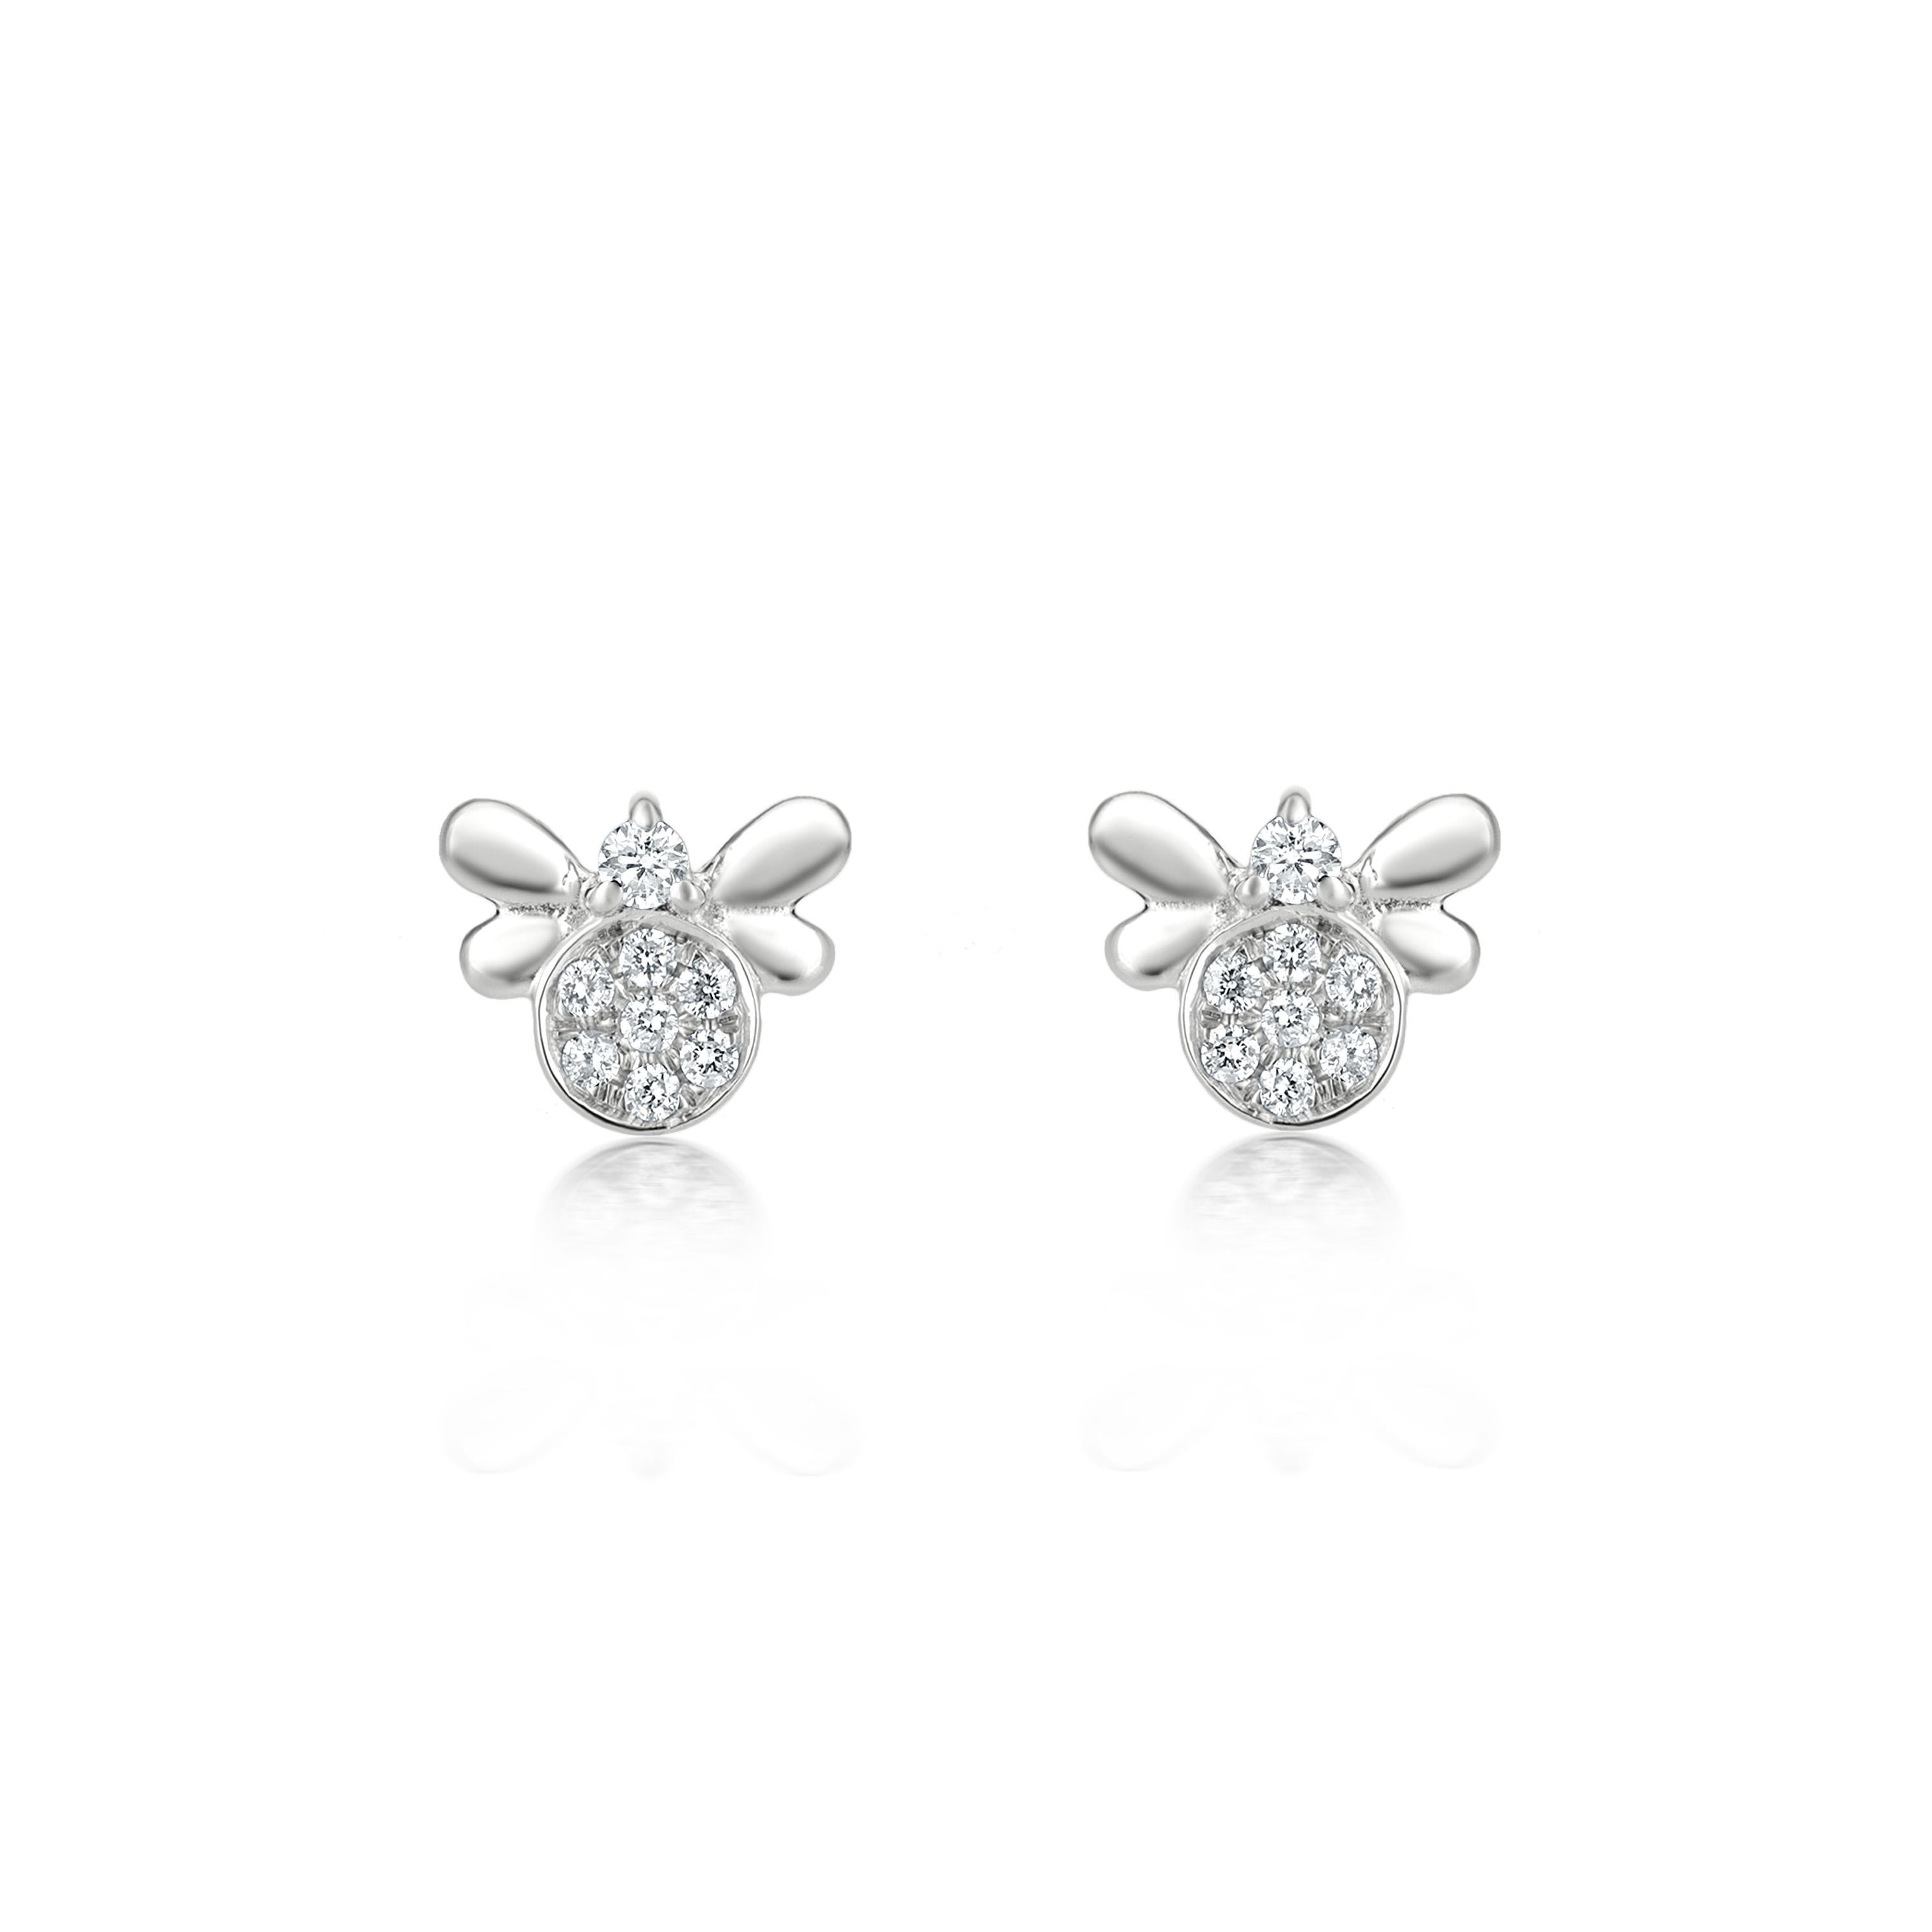 Grace your earlobes with a Luxle bee stud it symbolizes a strong network of unconditional love and support. Subtle yet pretty this bee stud earrings is the new fashion statement. These stud earrings sparkle with 16 round cut diamonds, totaling